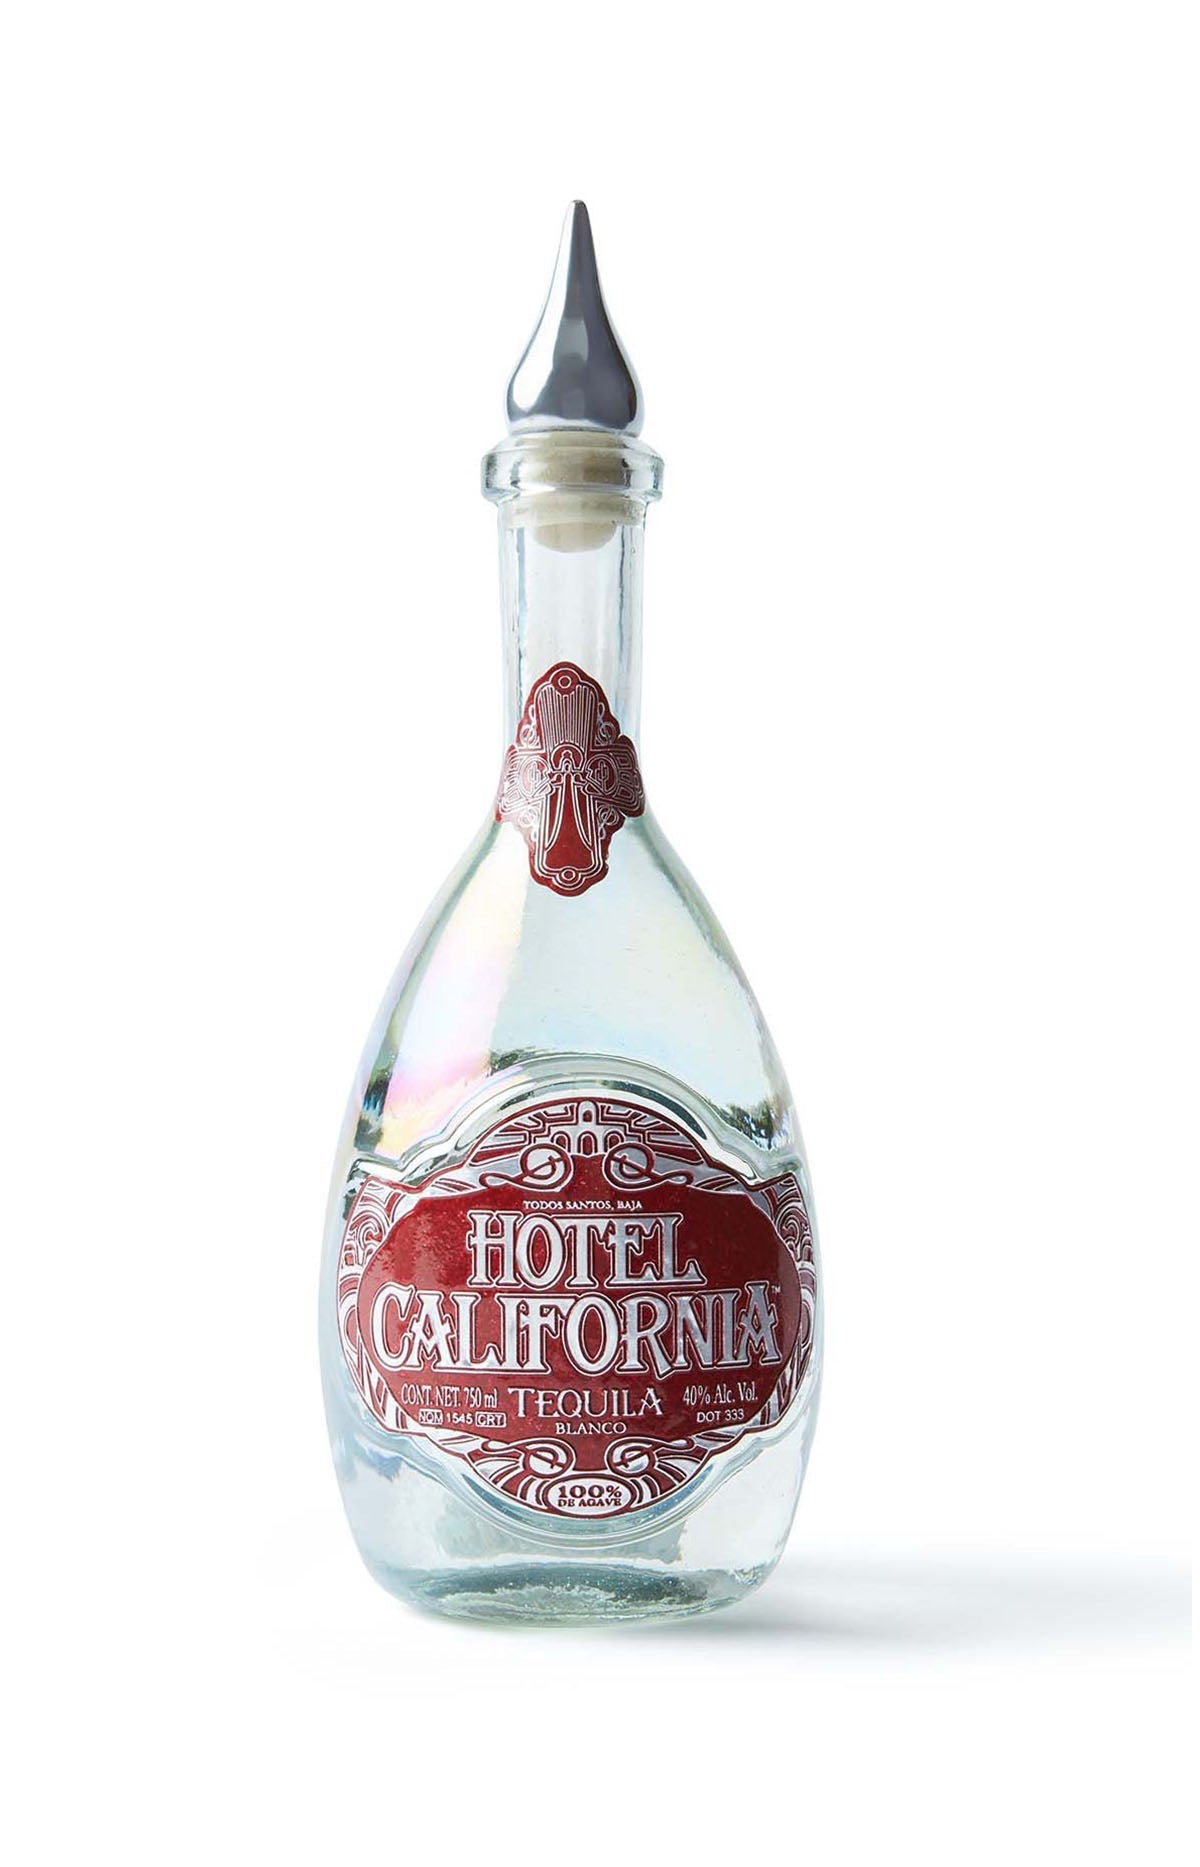 Hotel California Blanco Tequila. Made from 100% Blue Weber Agave in Jalisco, Mexico. No additives. A premium small-batch sipping tequila. Also best tequila for Margaritas, best tequila for Palomas. Best tequilas to stand up in your favorite cocktails. Old-school tequila flavors and profile. 